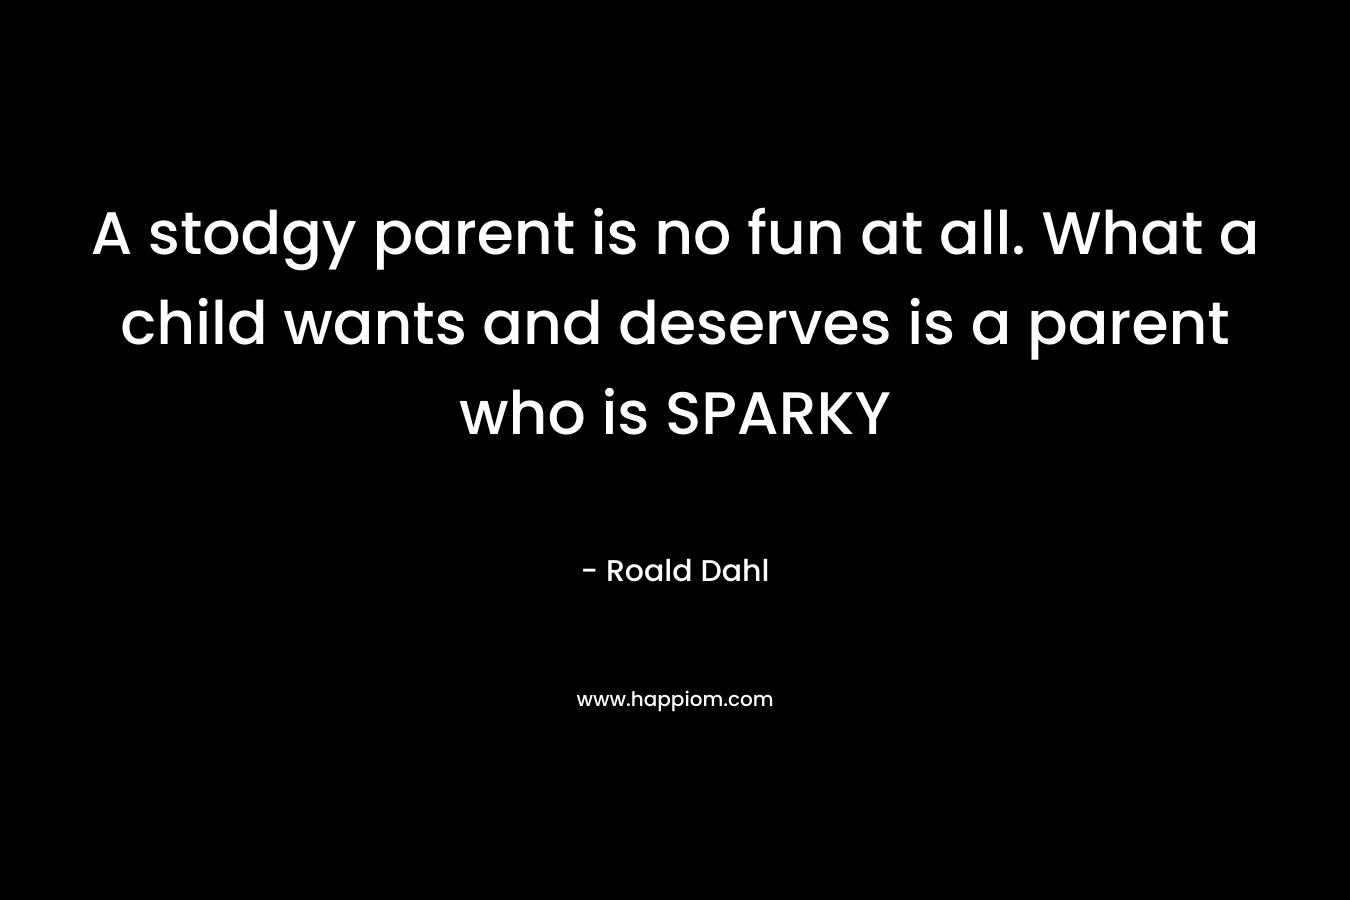 A stodgy parent is no fun at all. What a child wants and deserves is a parent who is SPARKY – Roald Dahl